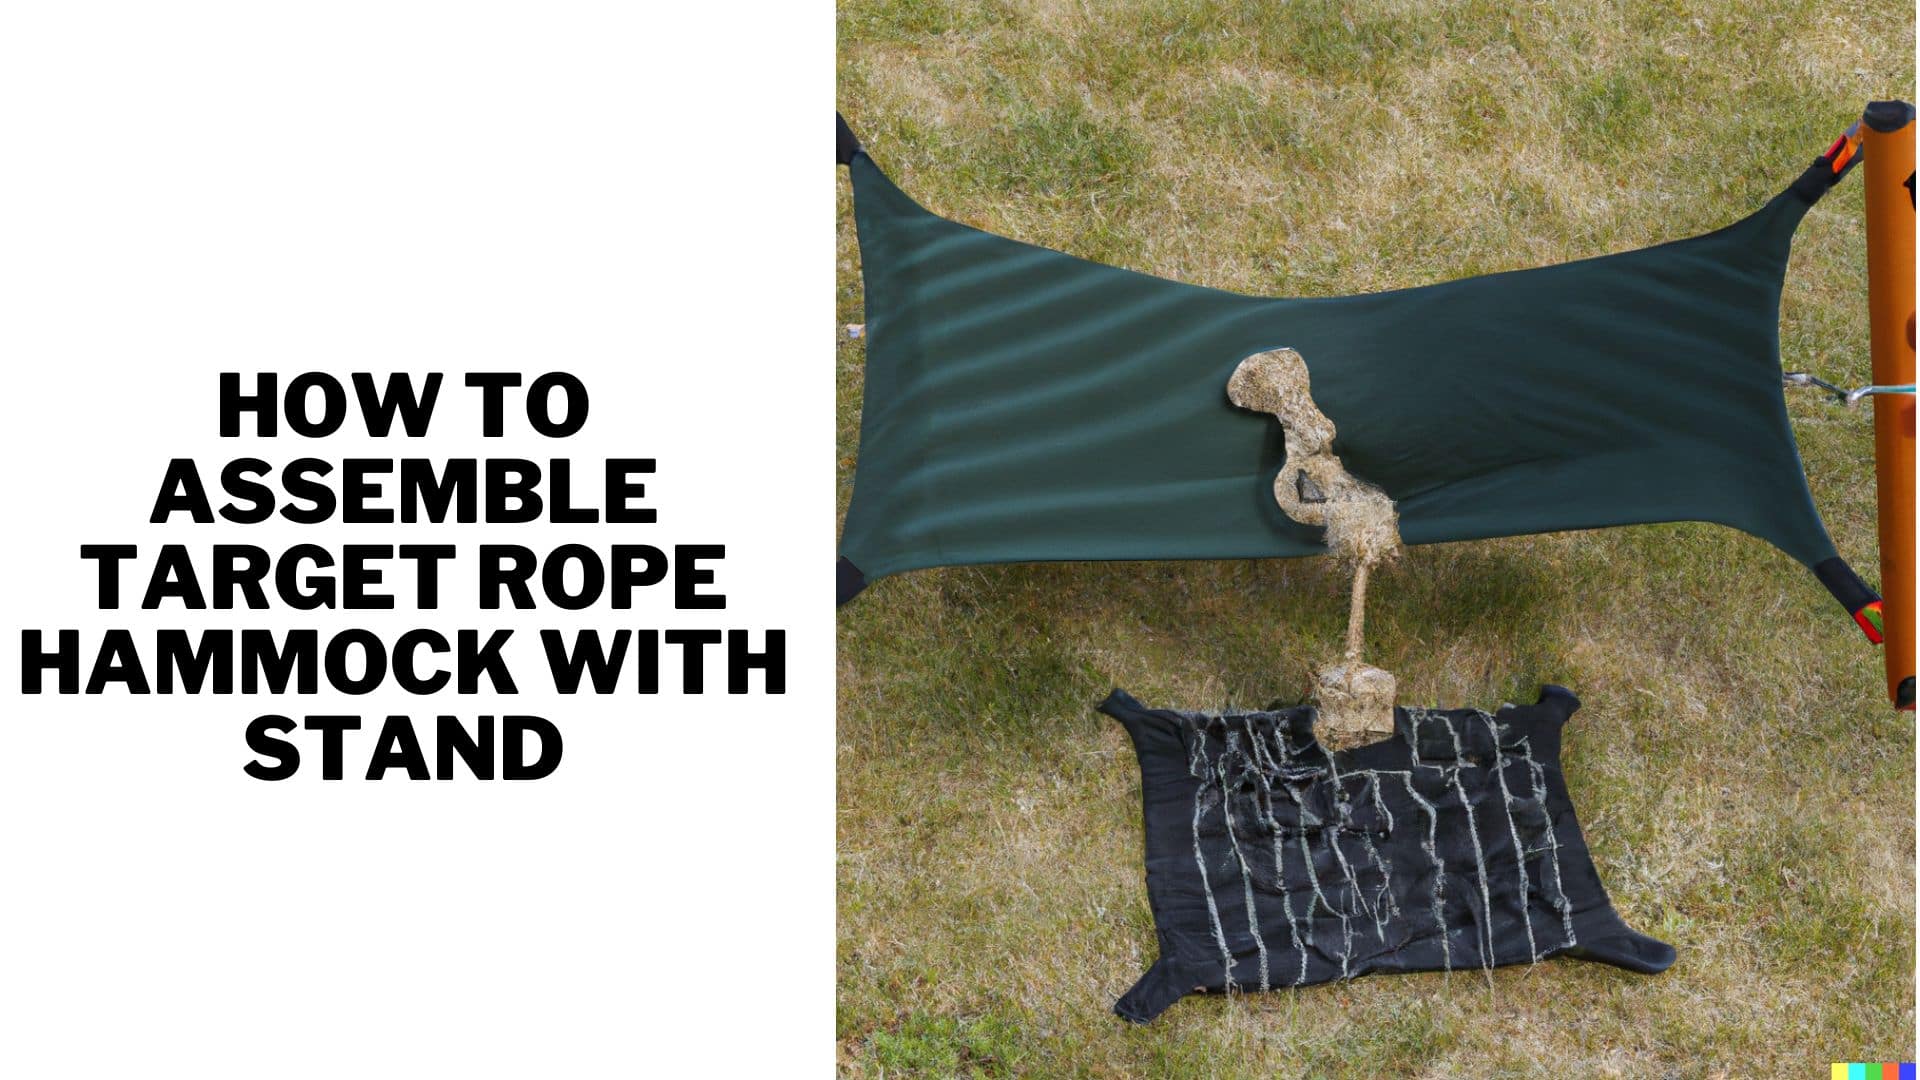 How to Assemble Target Rope Hammock With Stand